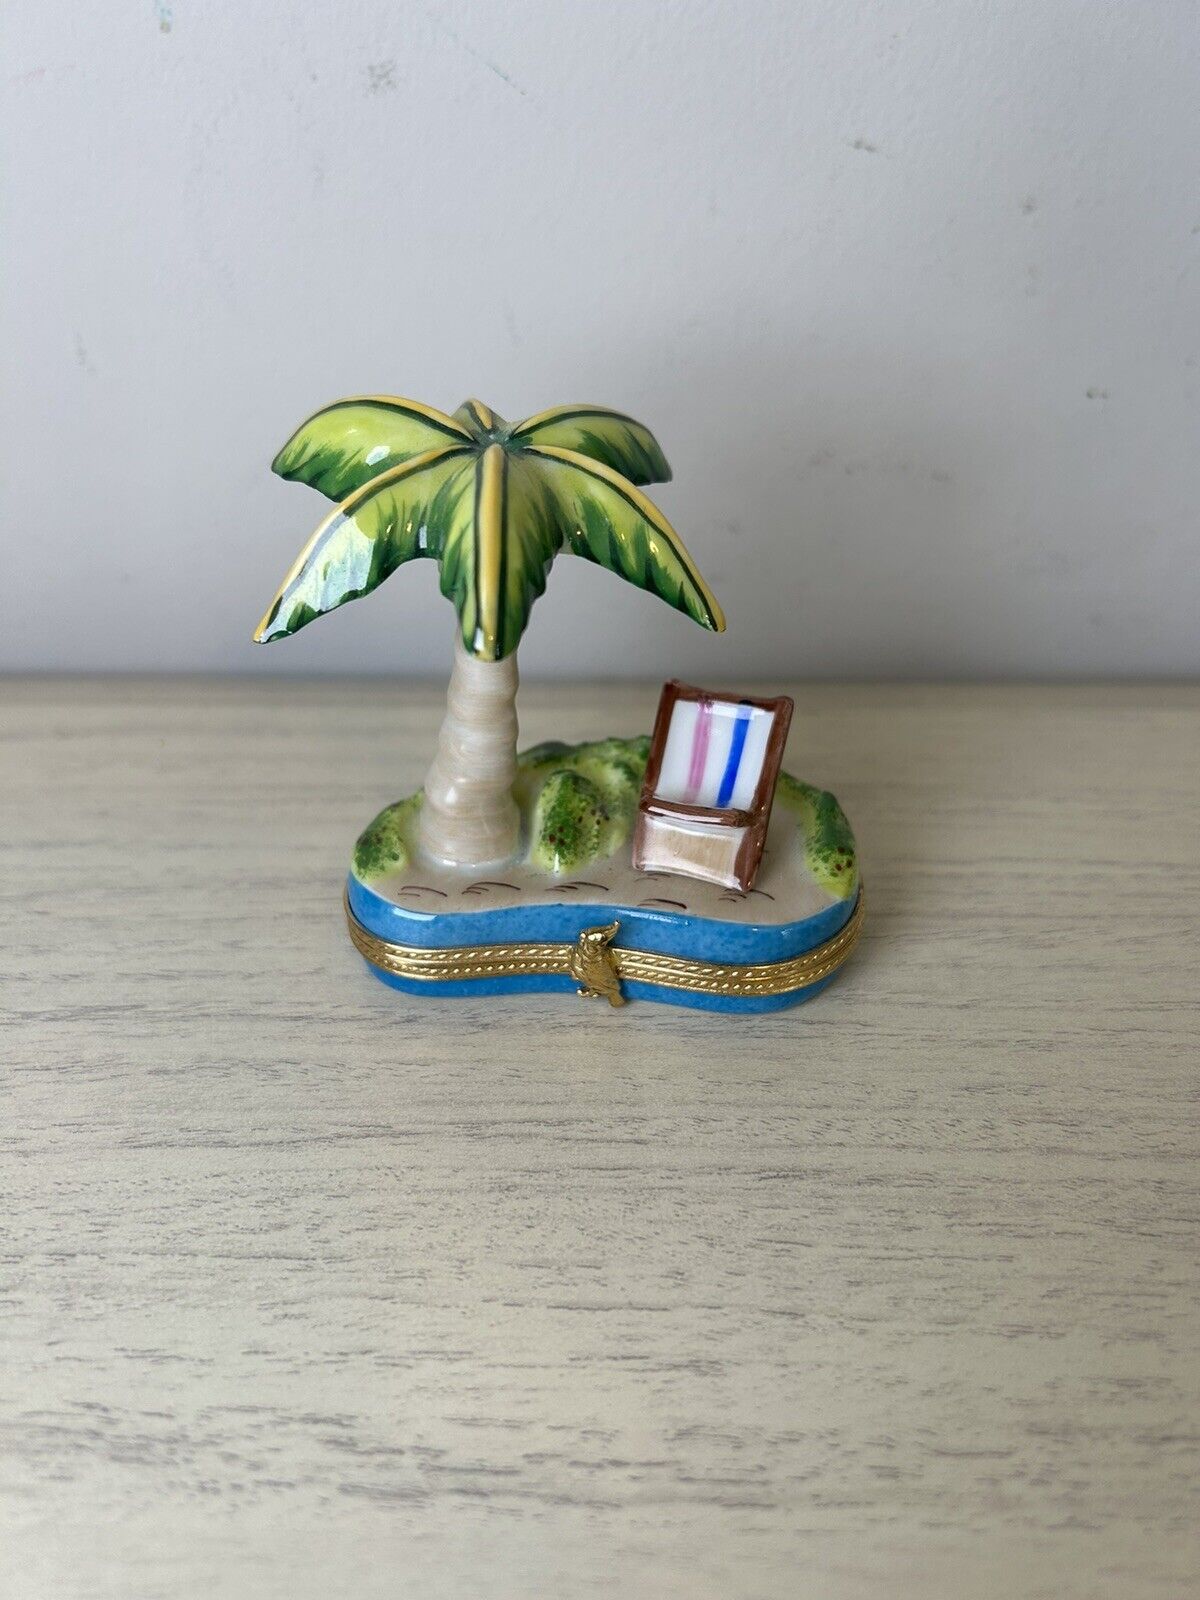 Limoges Porcelain Palm Tree with Chair on Beach Island Trinket Box Limited Ed.